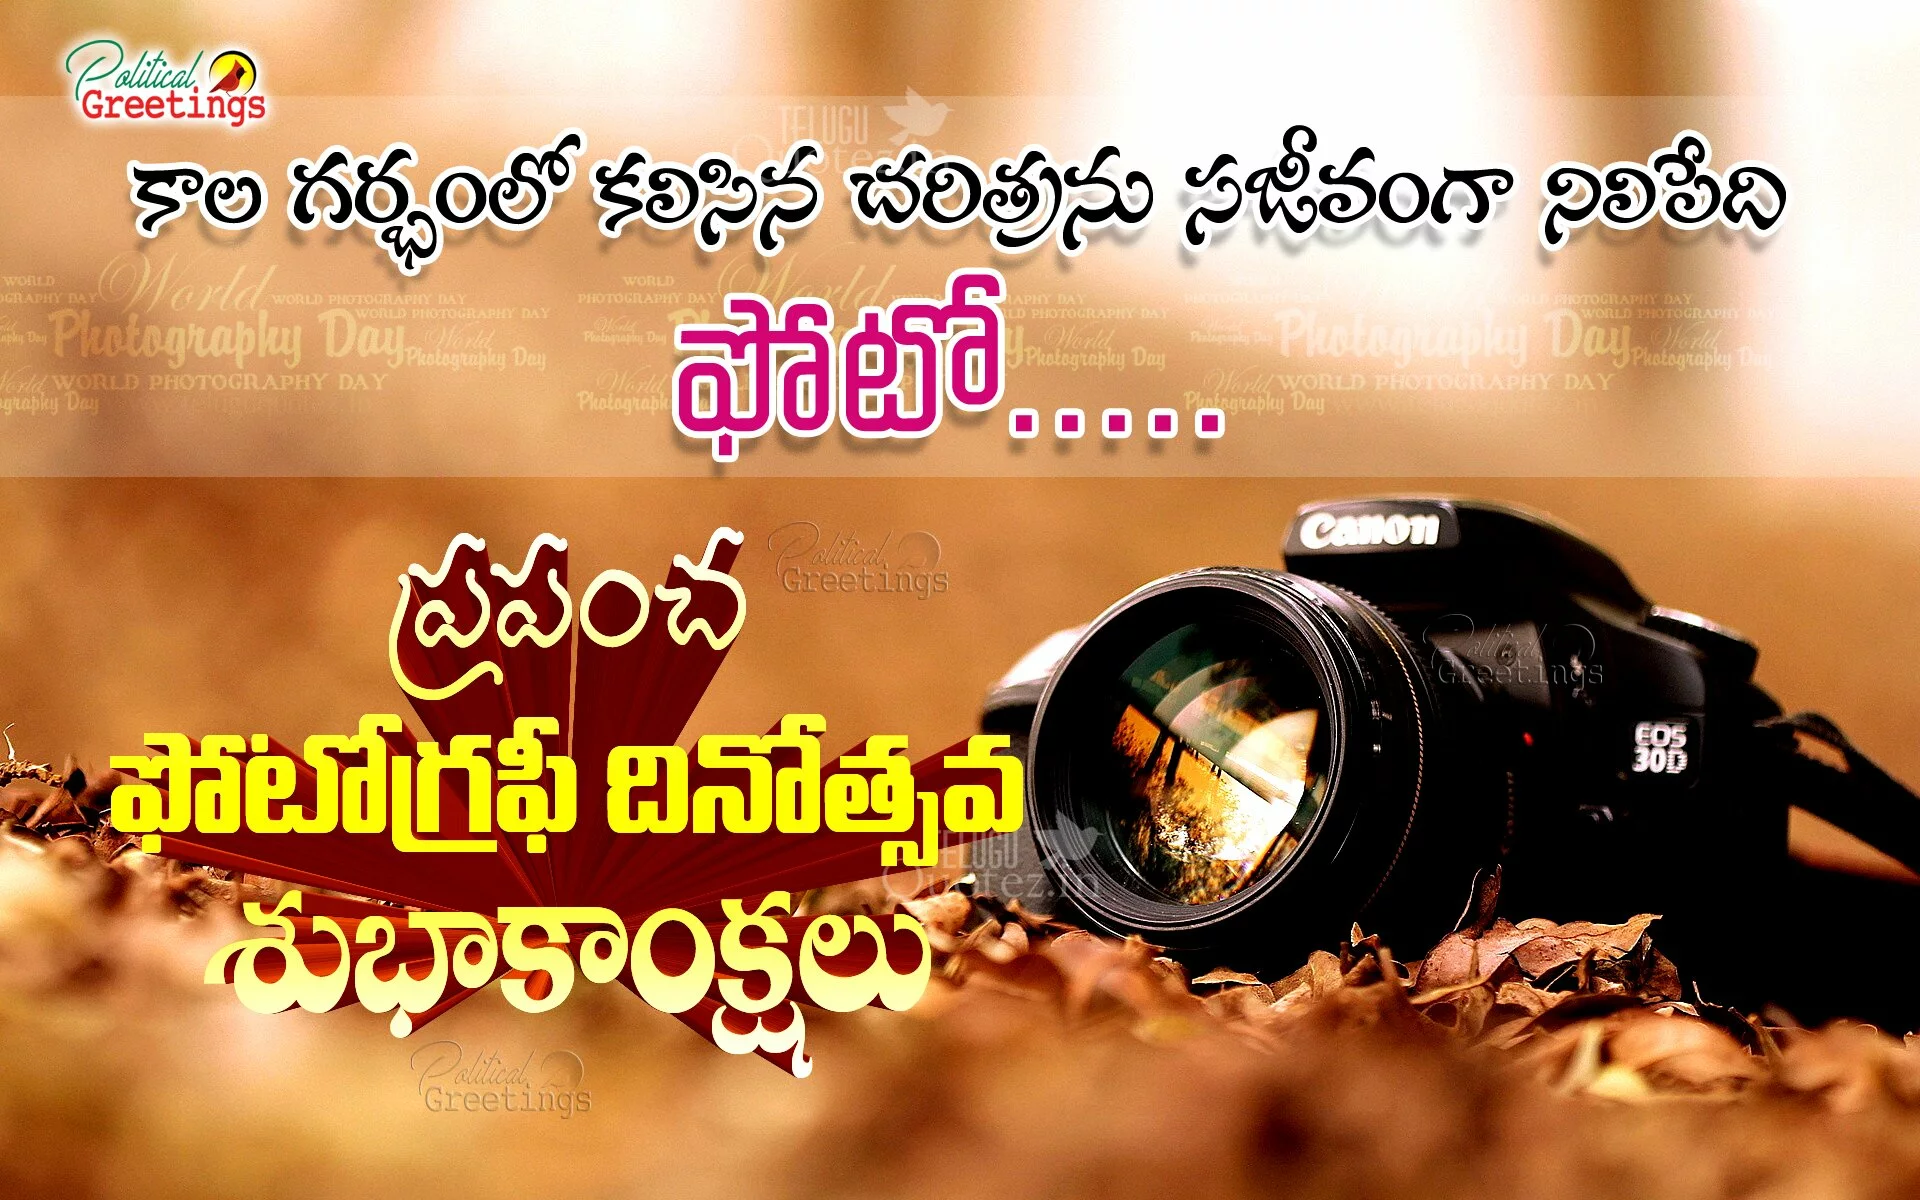 International Photography Day Advance Greetings Quotes in Telugu Language